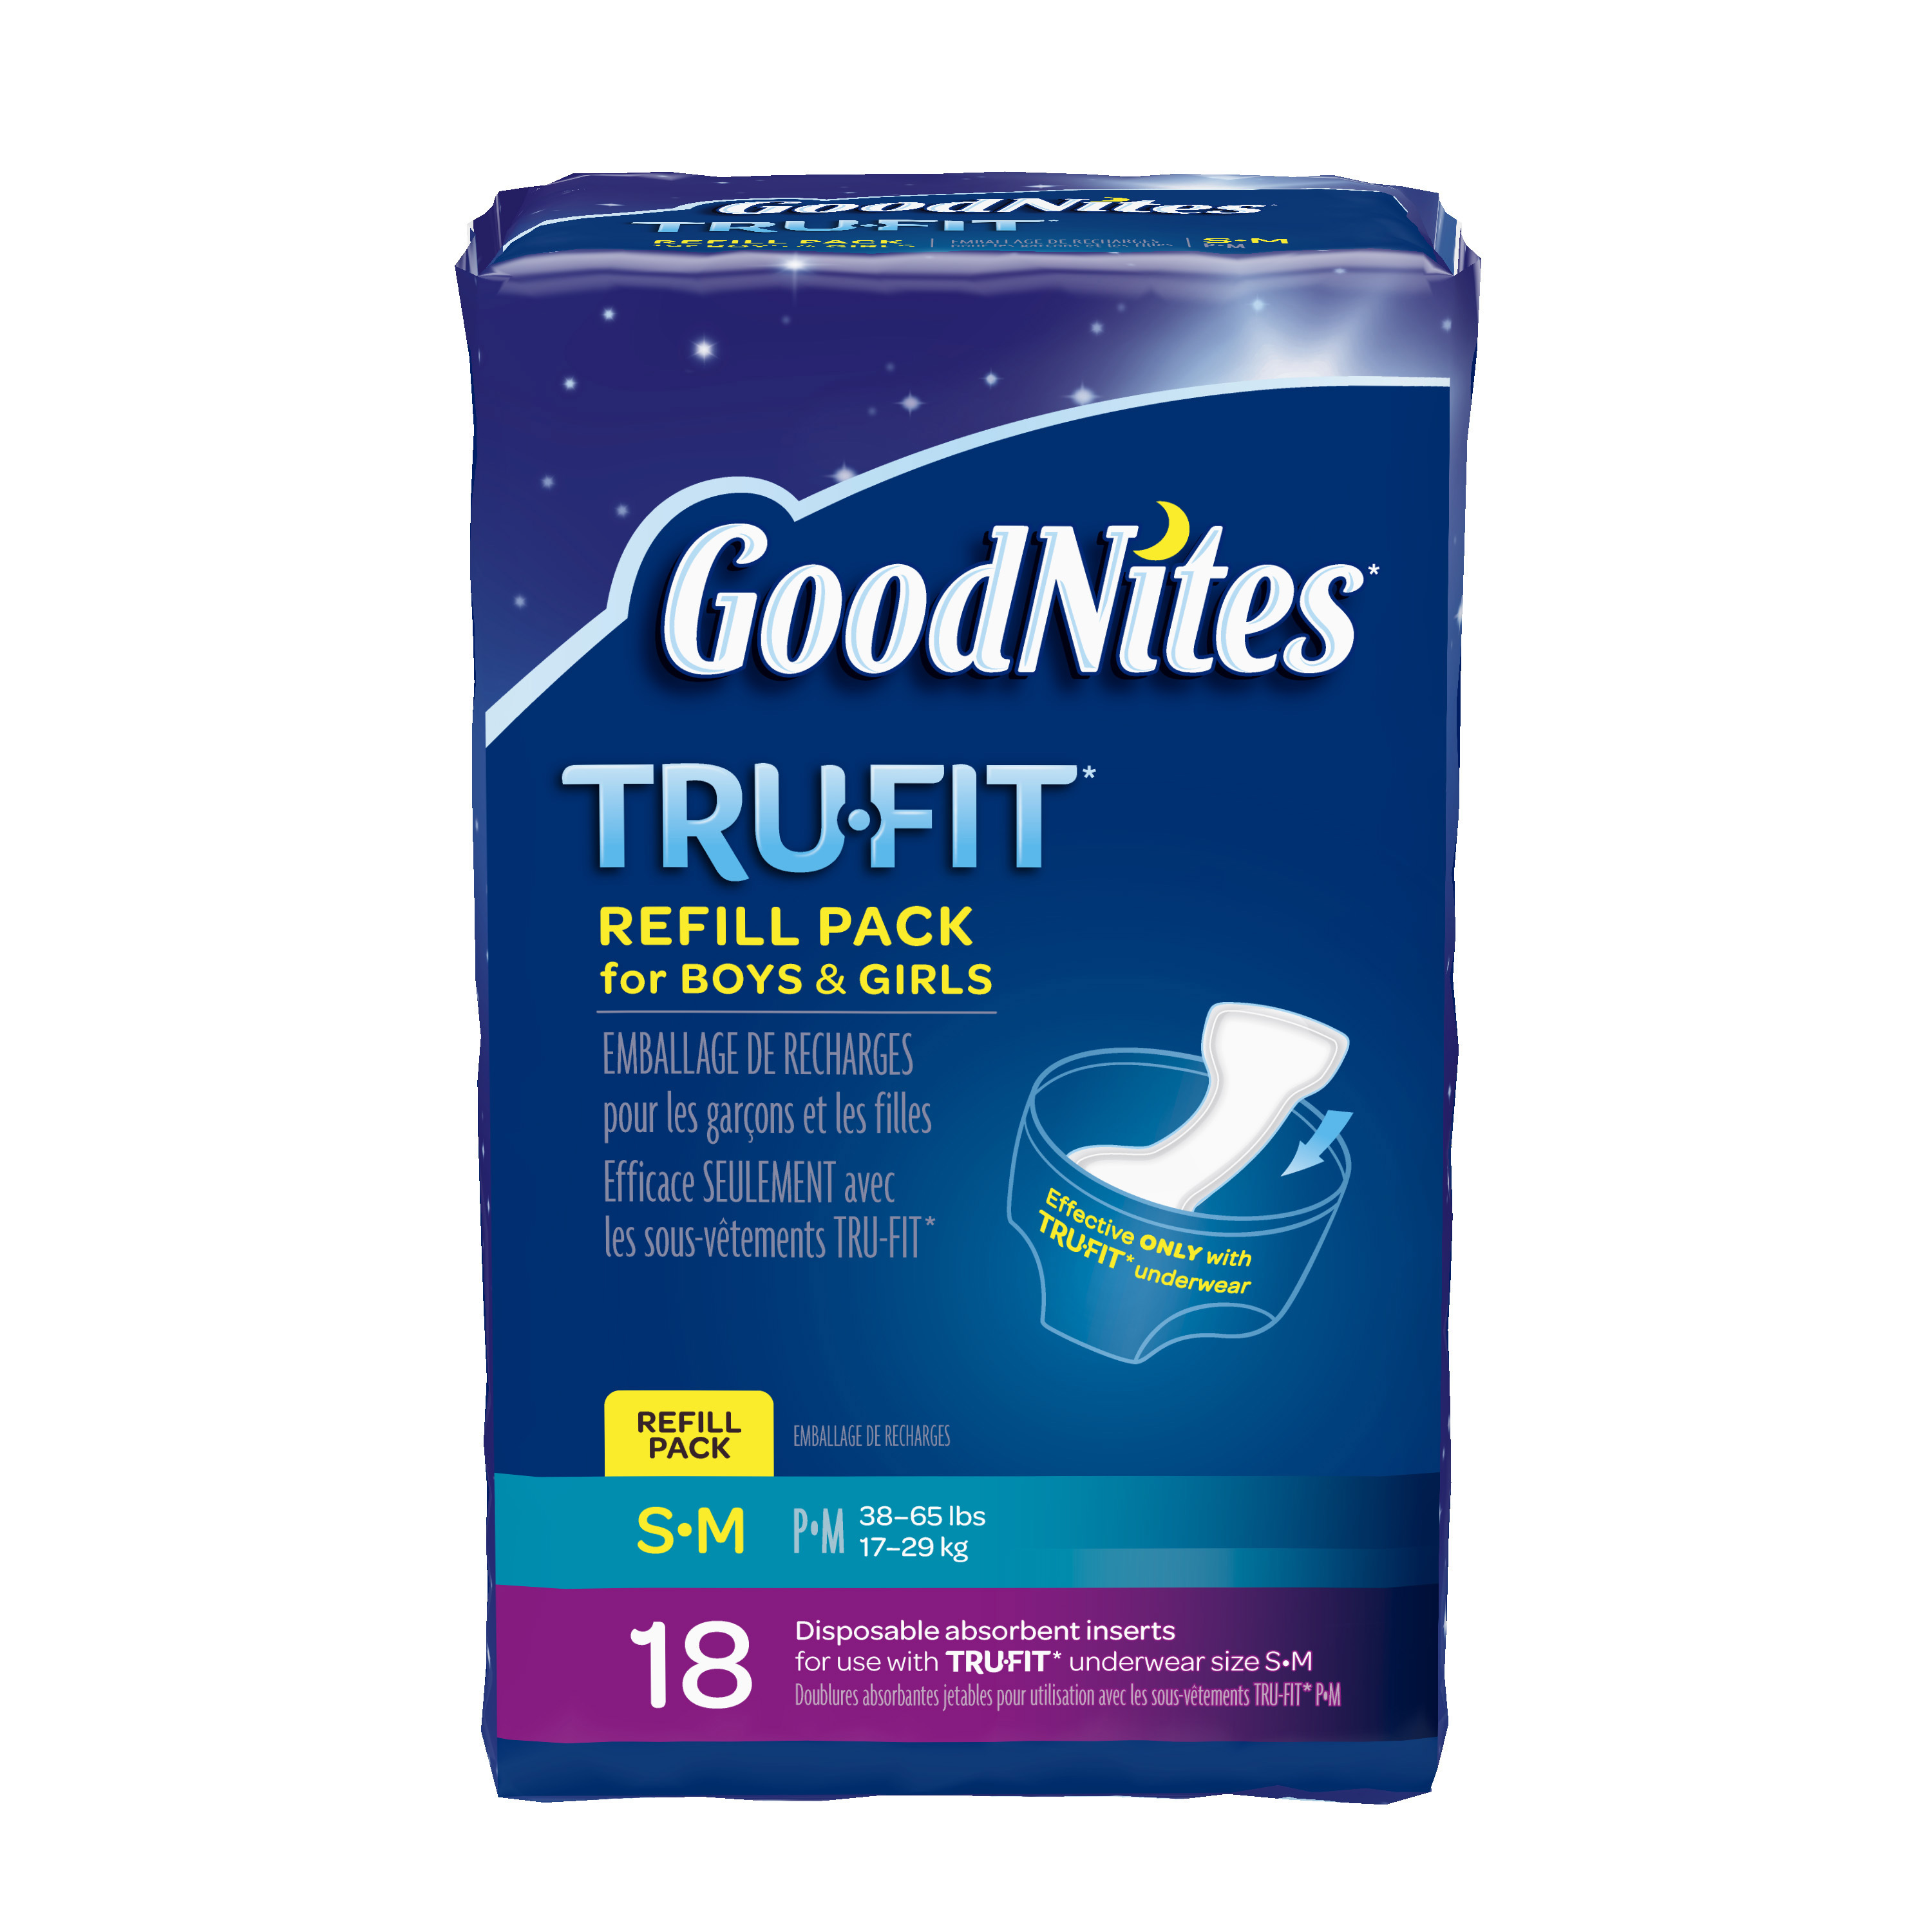 GoodNites TruFit Disposable Absorbent Inserts for Boys & Girls Refill Pack - image 1 of 8